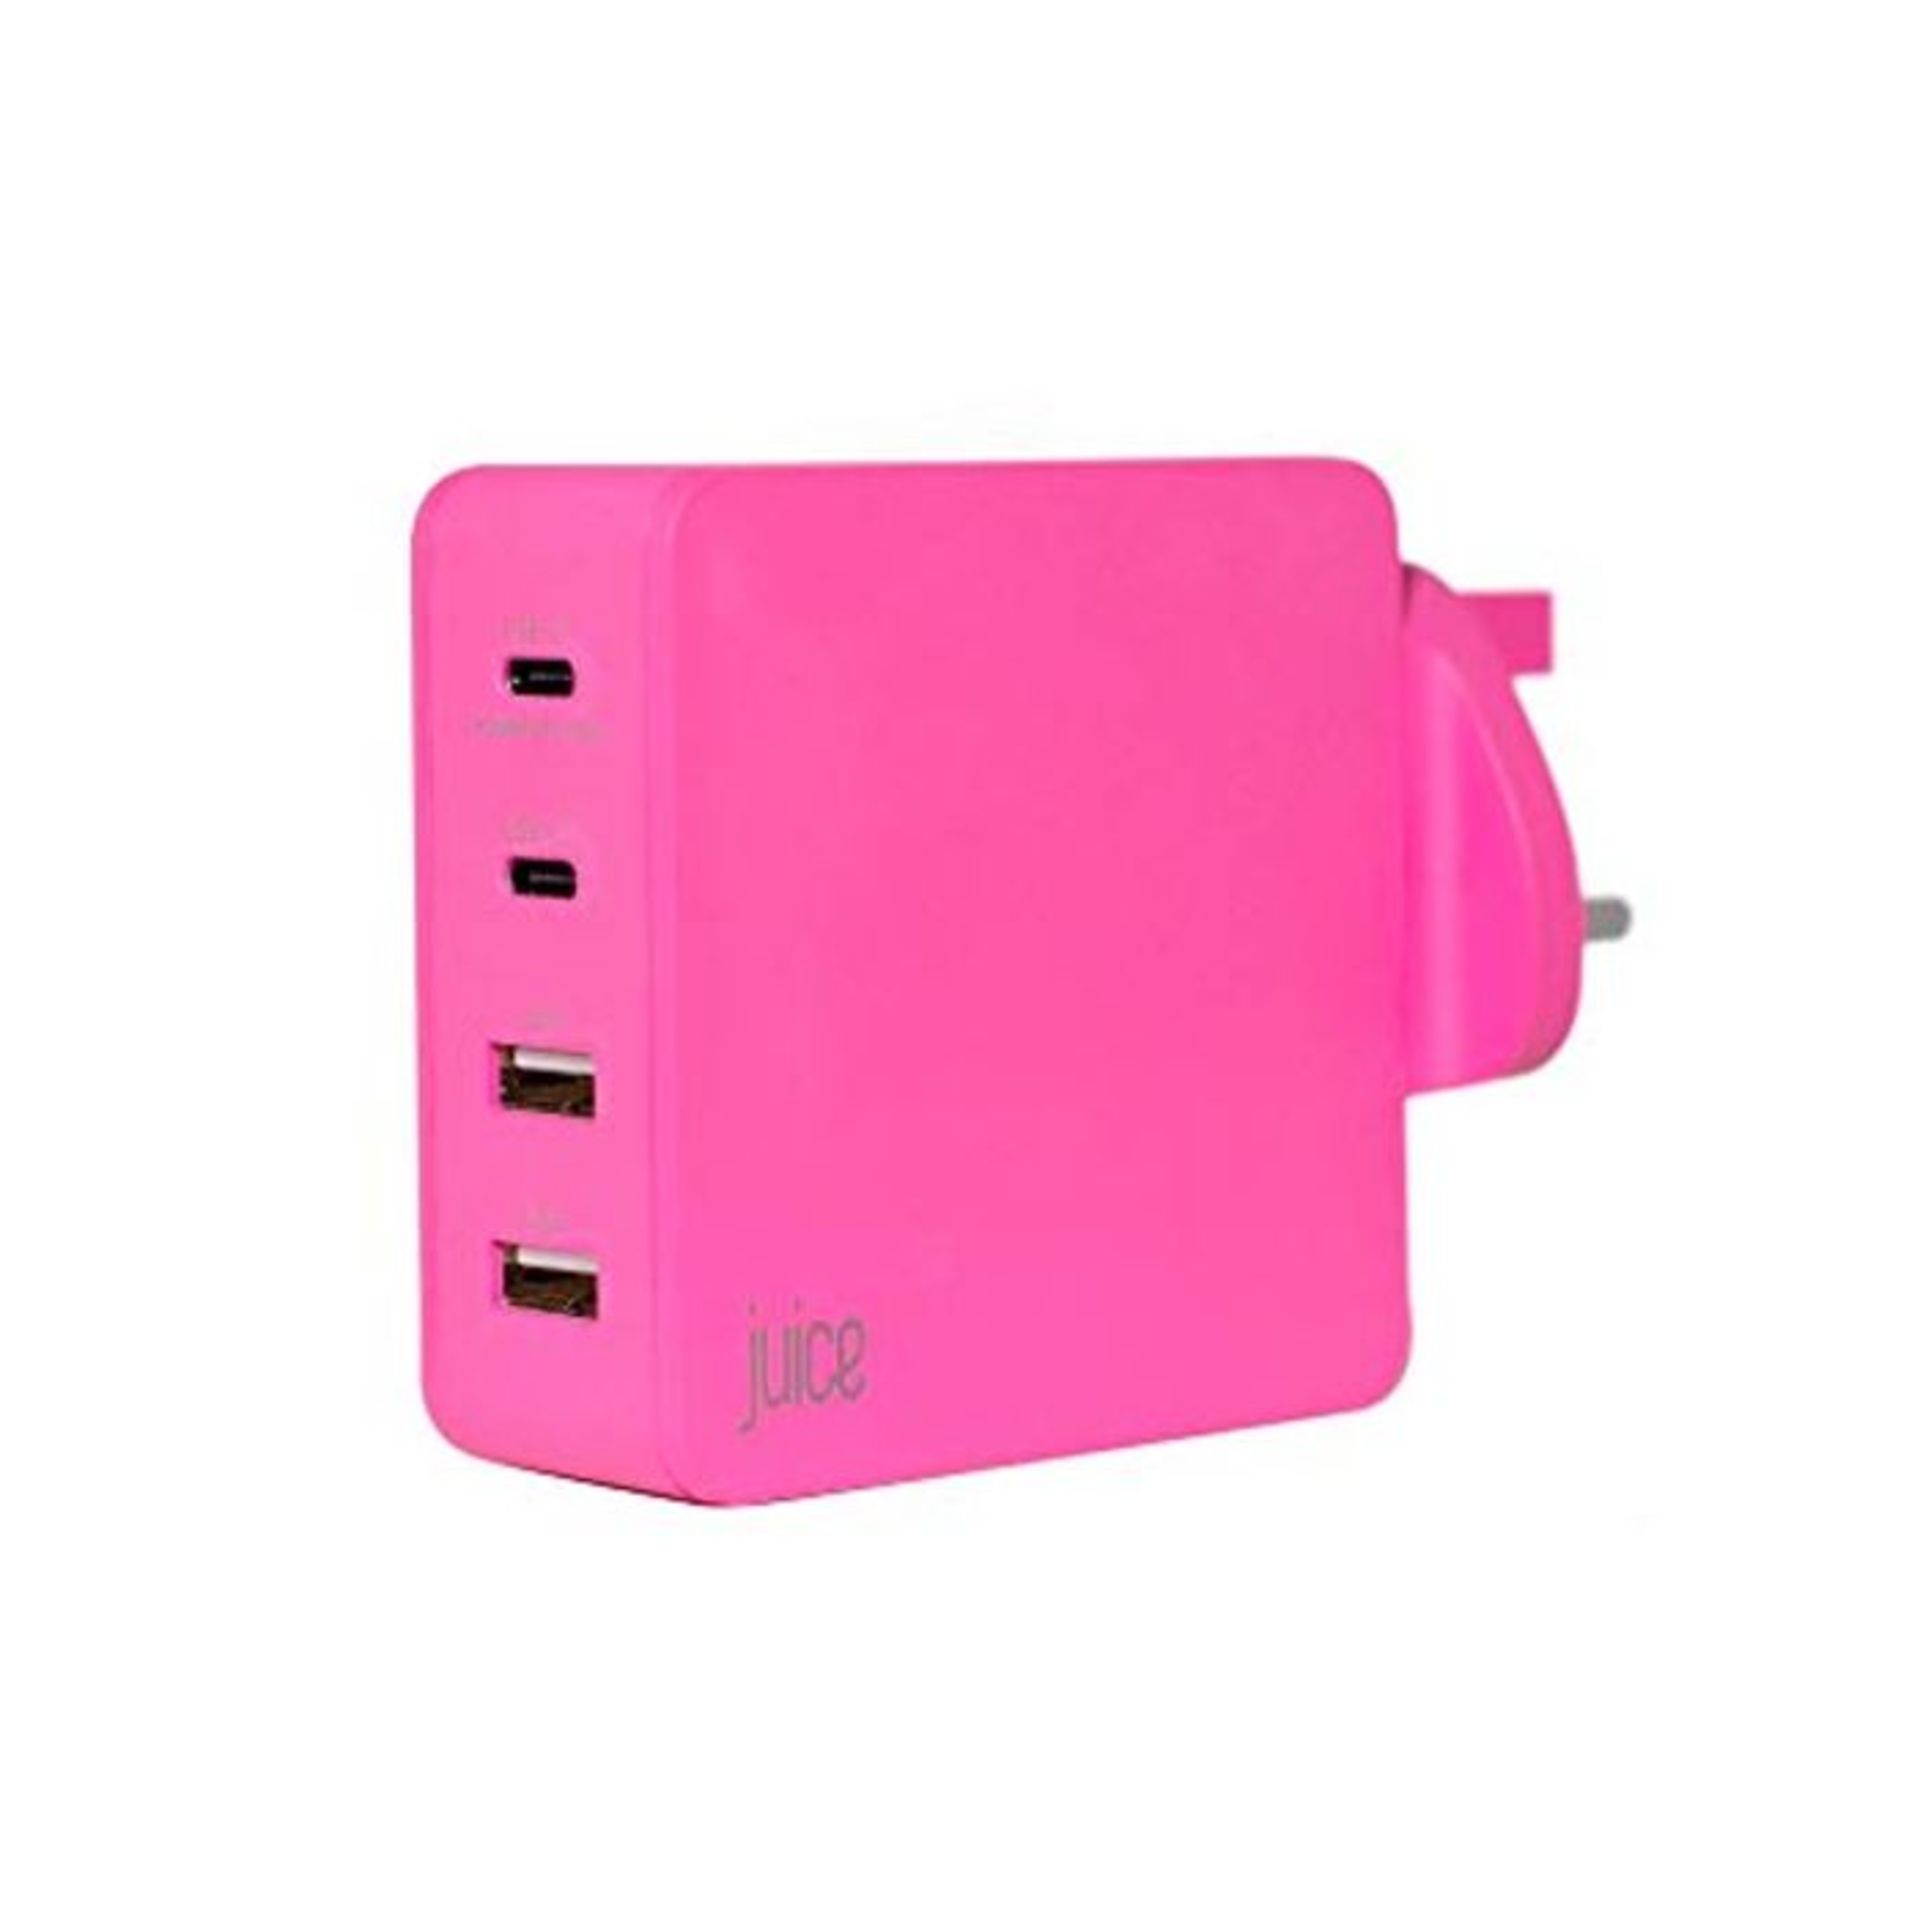 Juice Mains 4 Port USB Charger Type C 3.4A - Pink